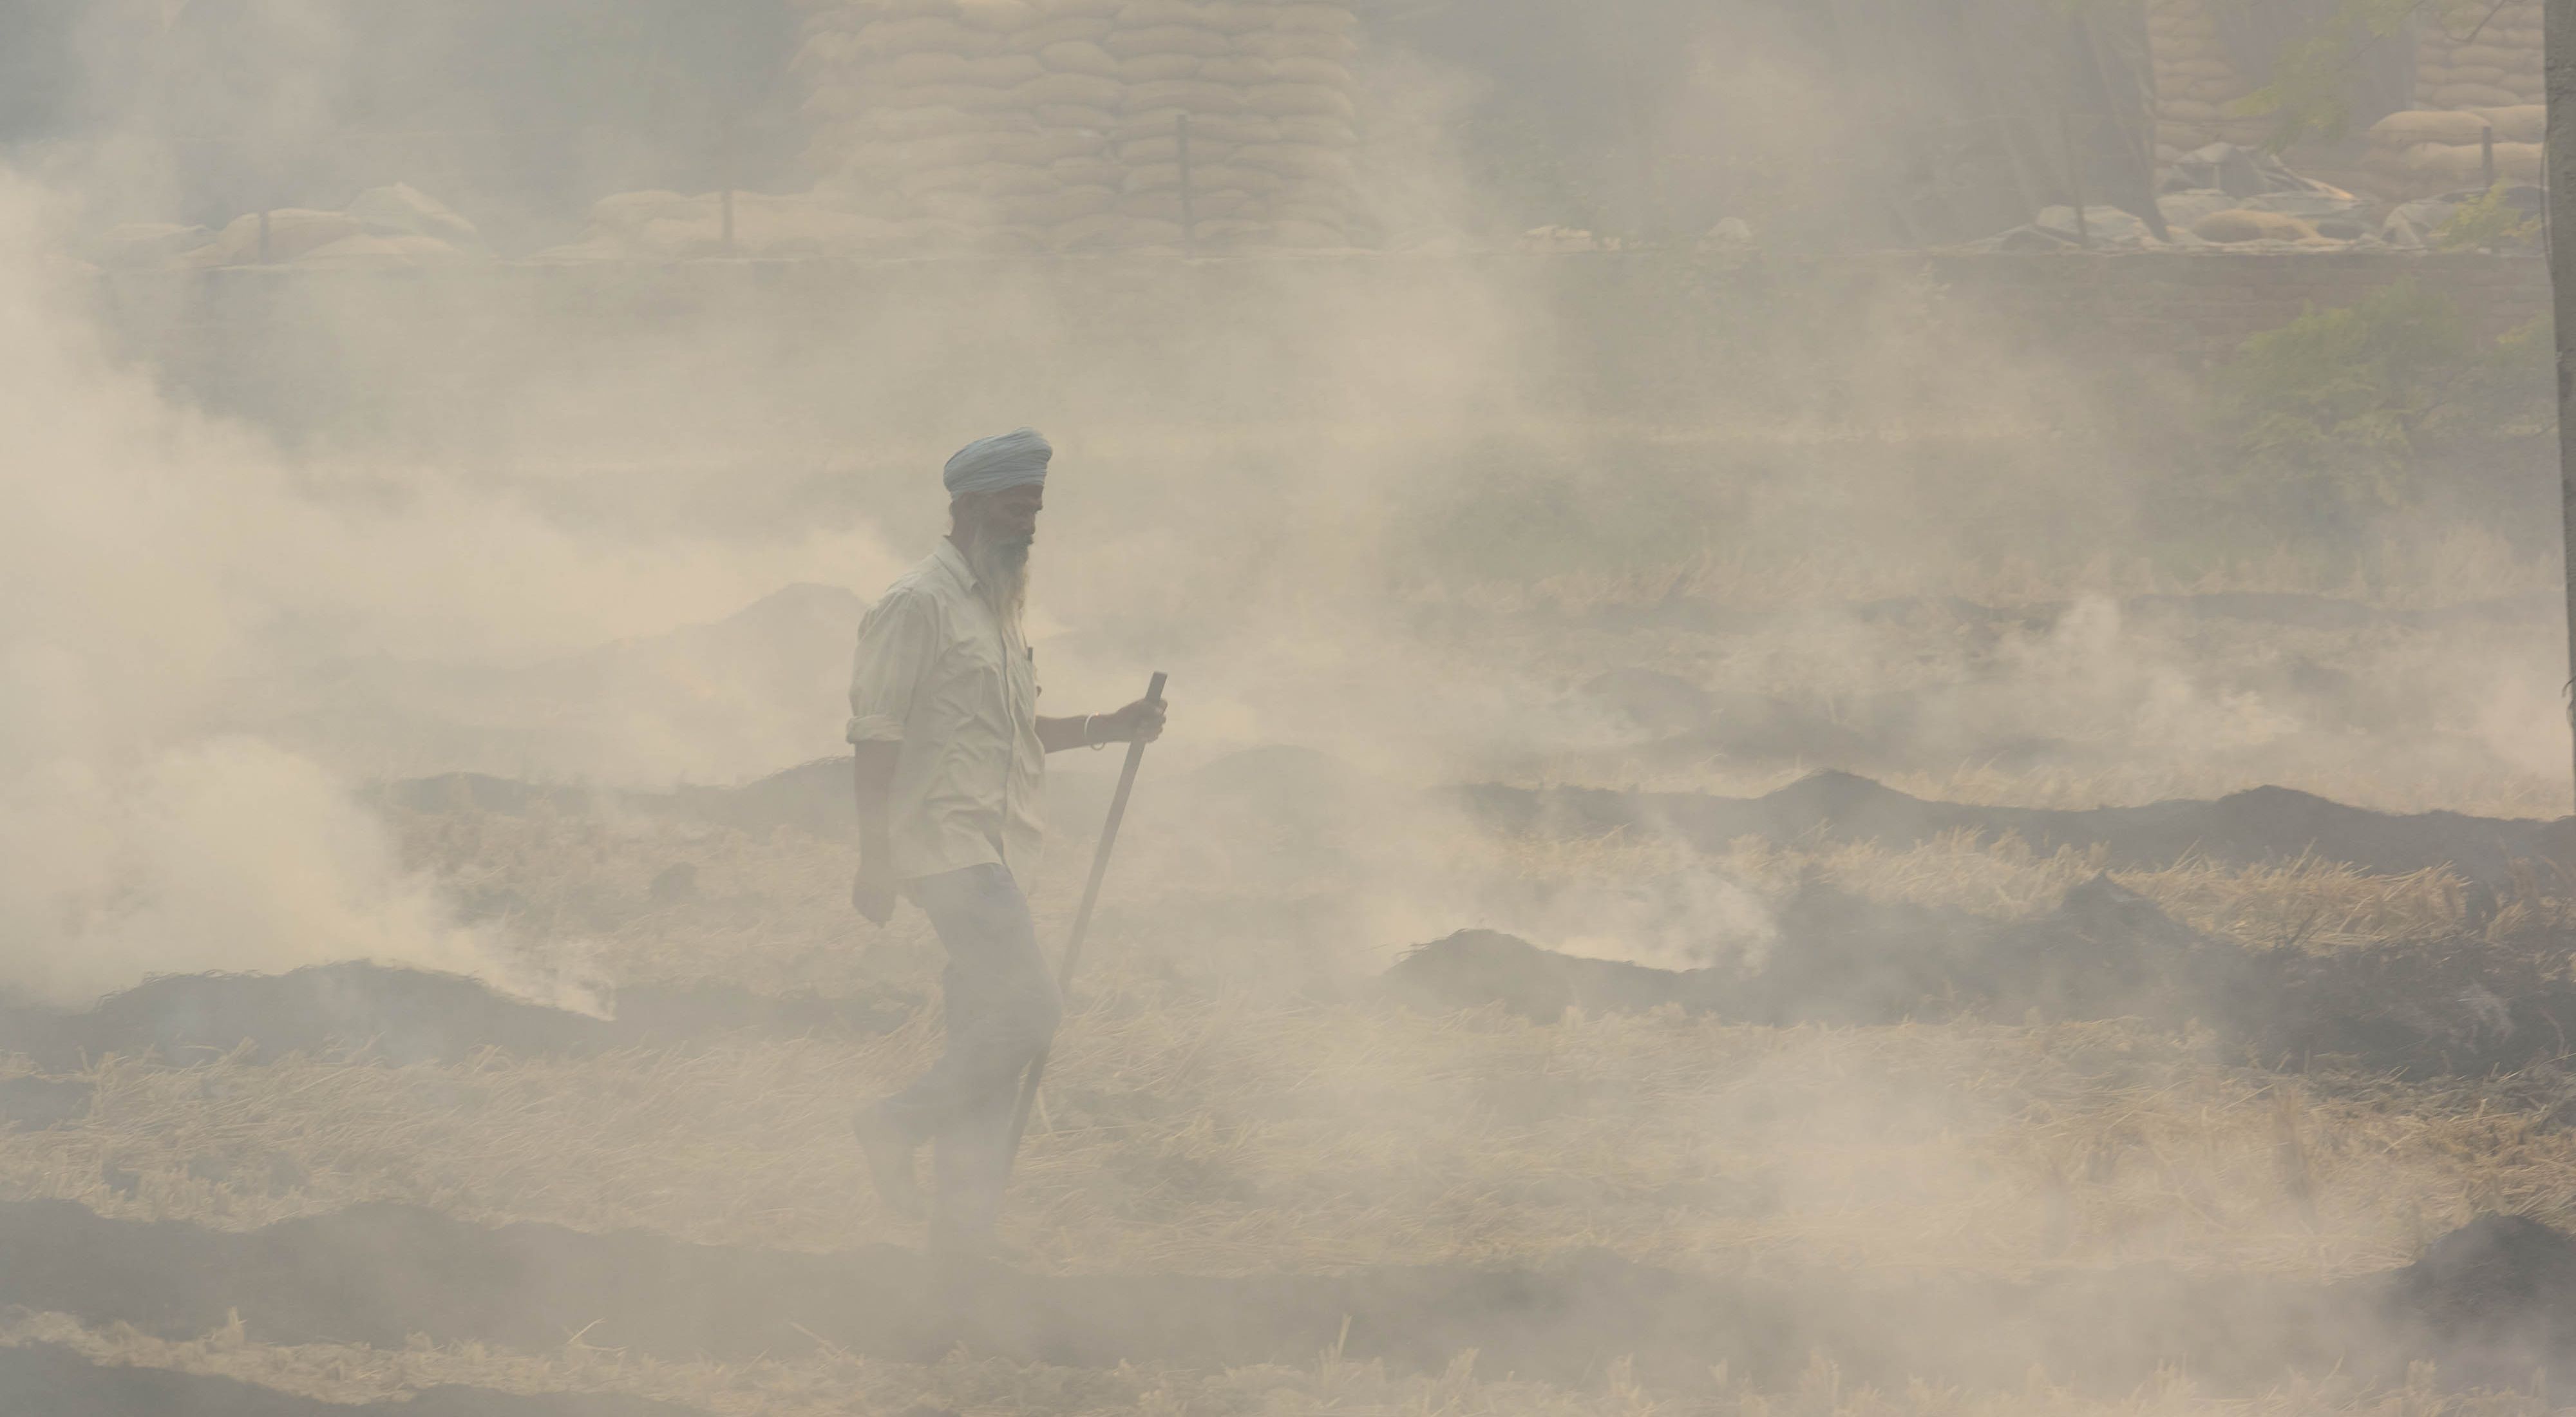 A farmer is obscured by smoke from burning crops on his field.